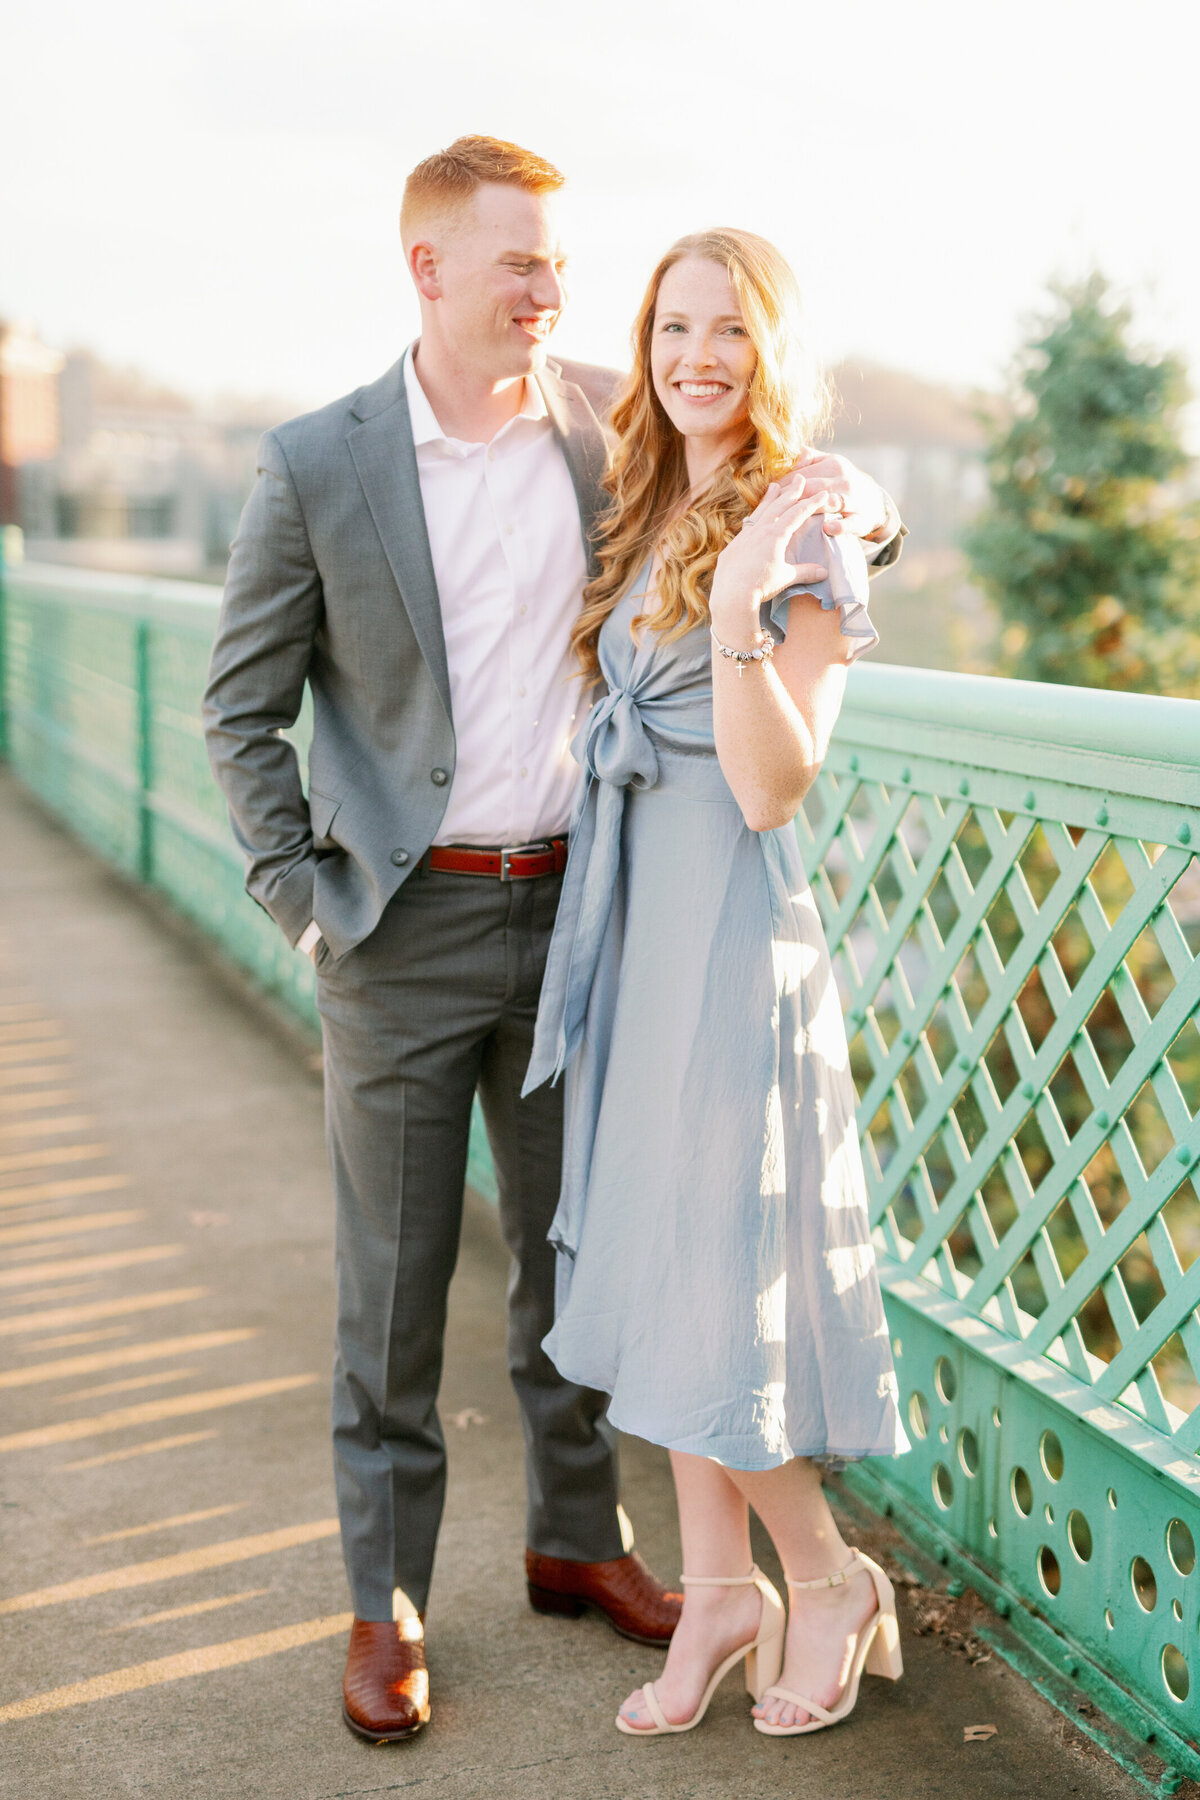 Rachel and Cam - Classy Downtown Engagement Session - World Wide Engagement session Photographer - Alaina René Photography-103